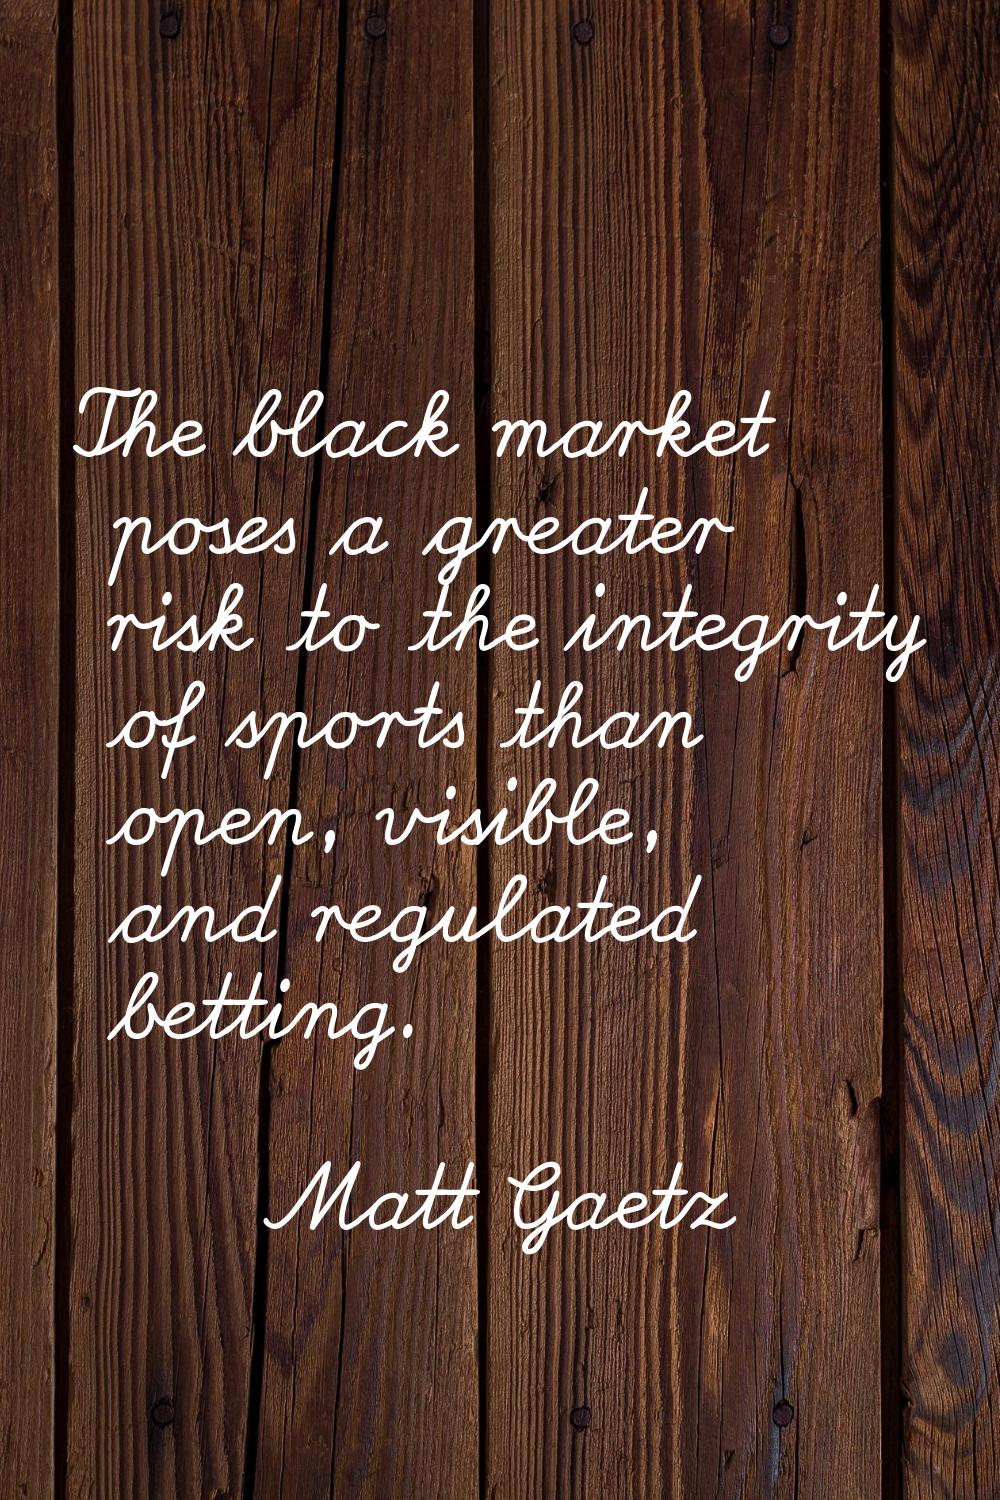 The black market poses a greater risk to the integrity of sports than open, visible, and regulated 